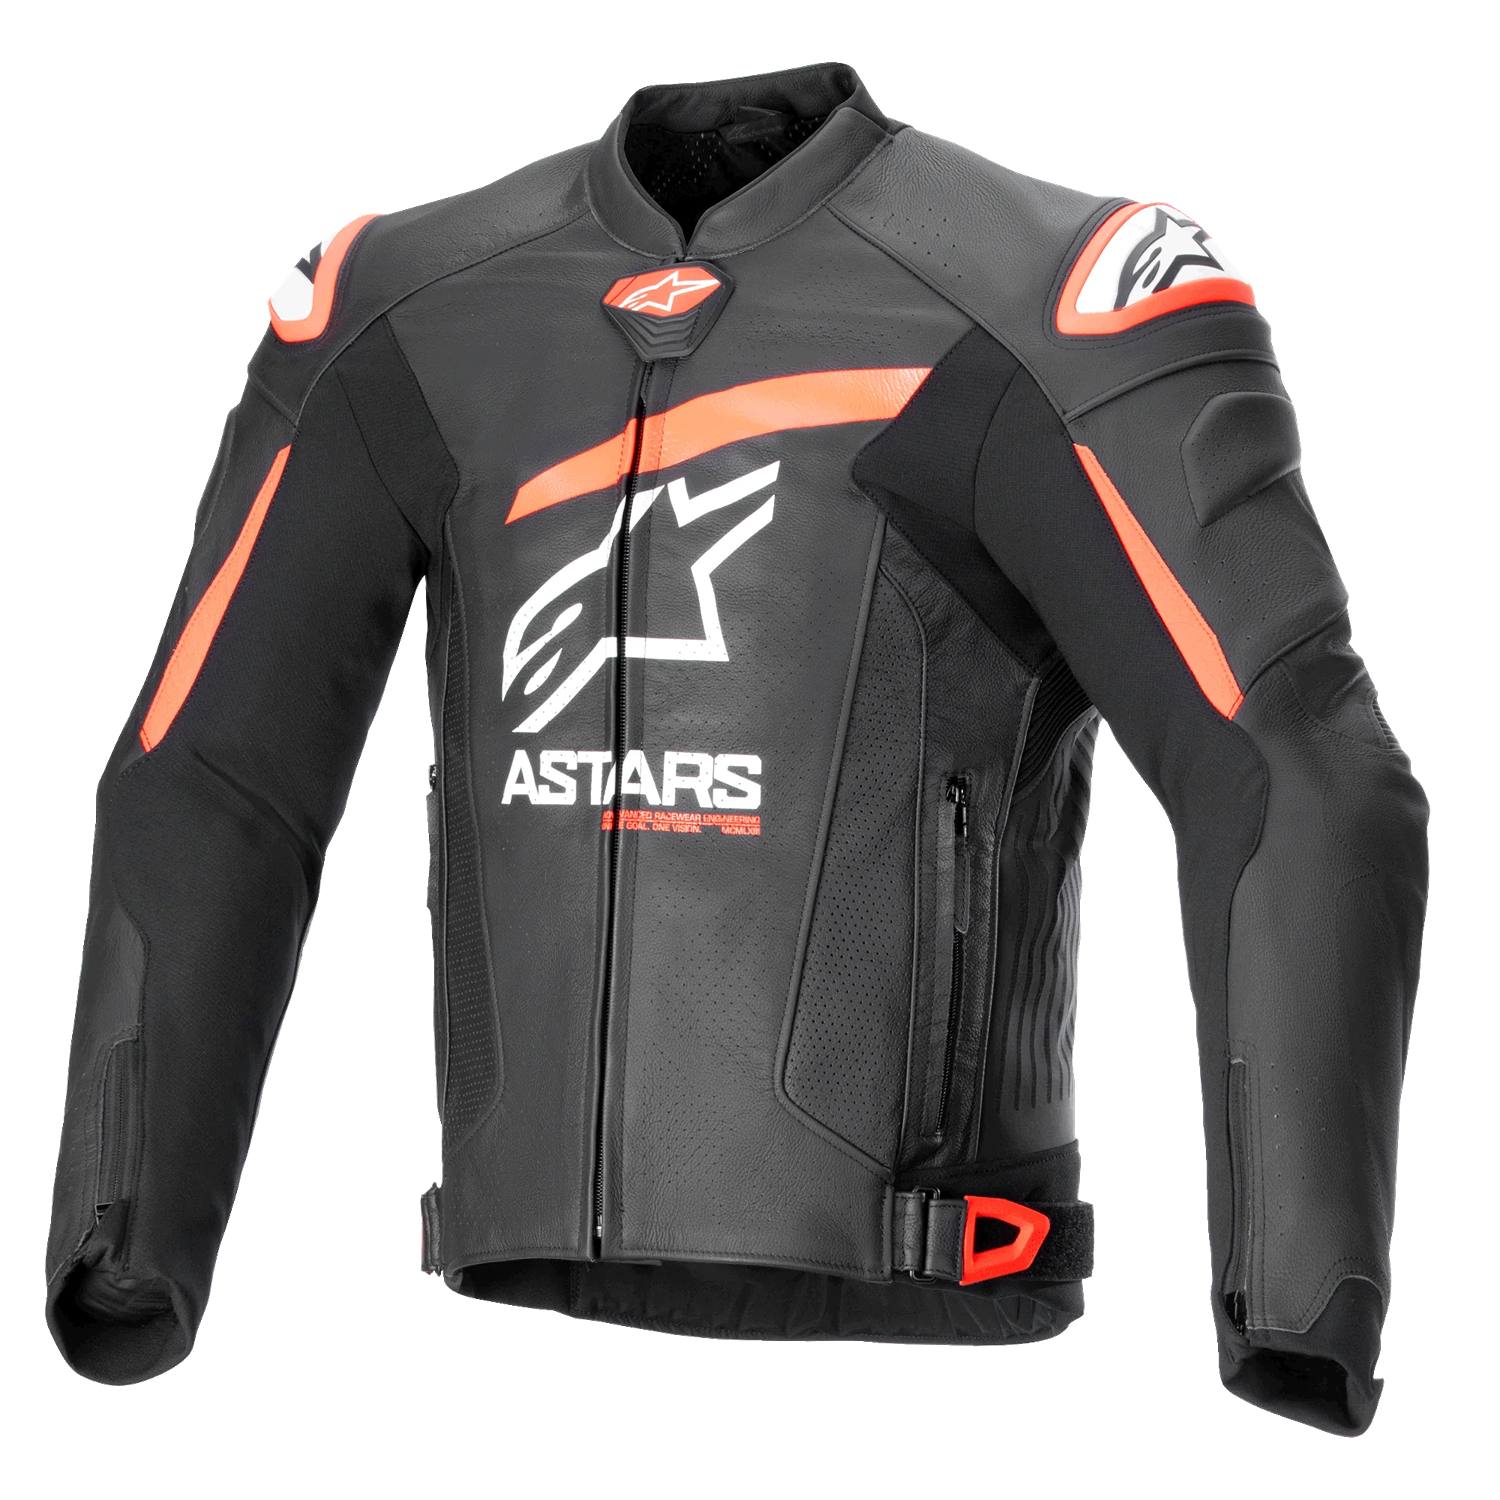 Image of Alpinestars Gp Plus R V4 Airflow Leather Jacket Black Red Fluo White Size 52 ID 8059347315102